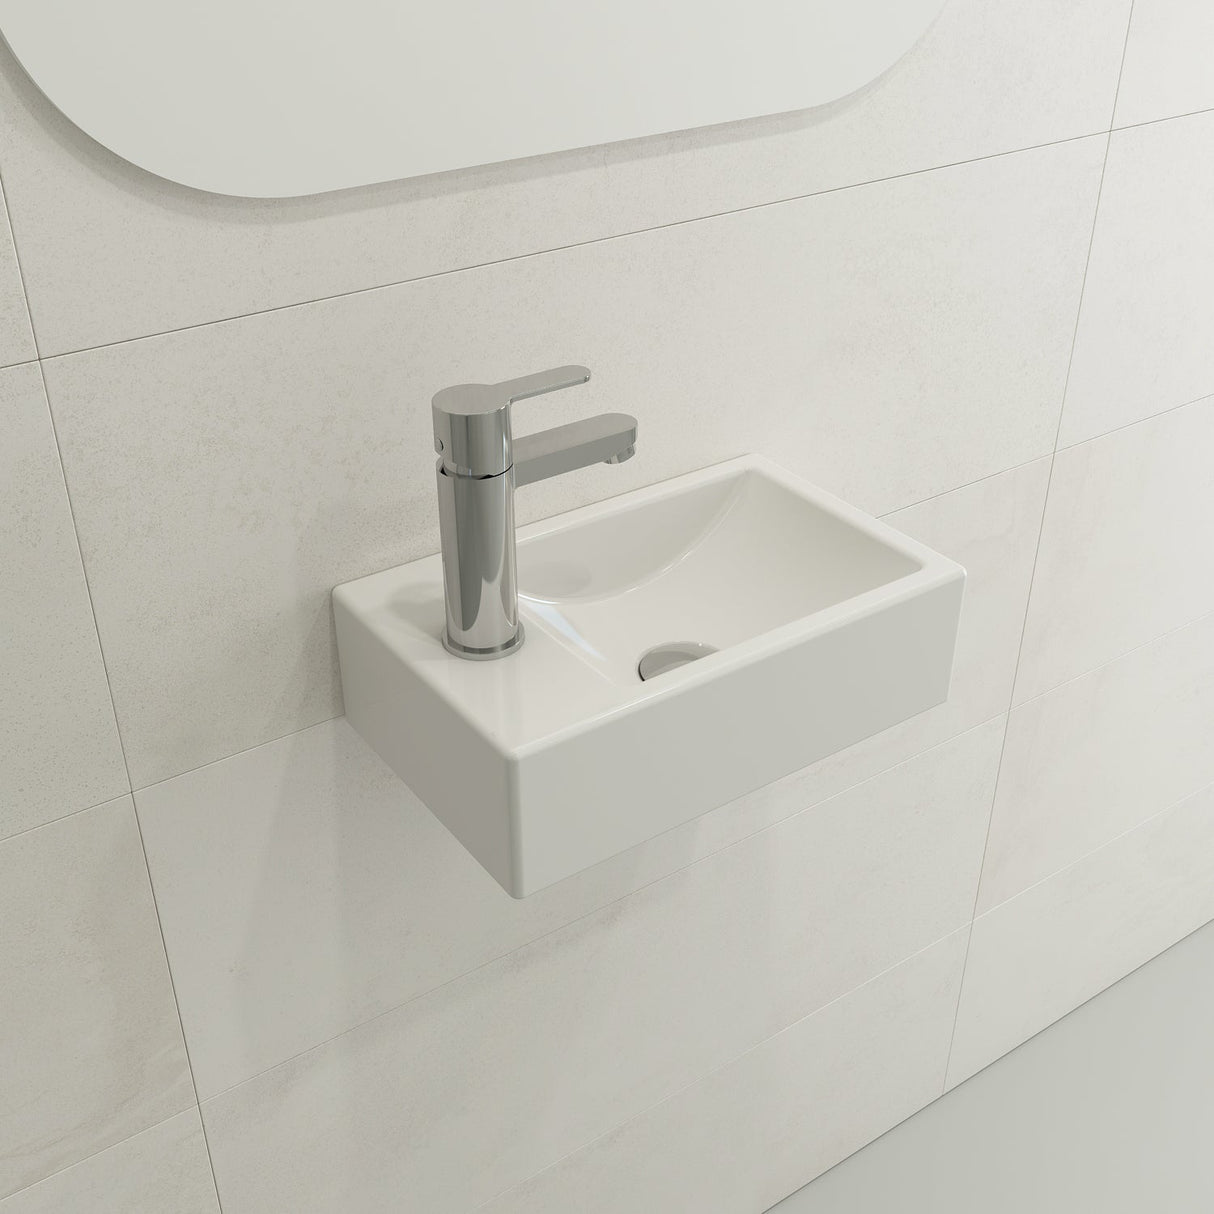 BOCCHI 1418-001-0126 Milano Wall-Mounted Sink Fireclay 14.5 in. 1-hole Left Side Faucet Deck in White